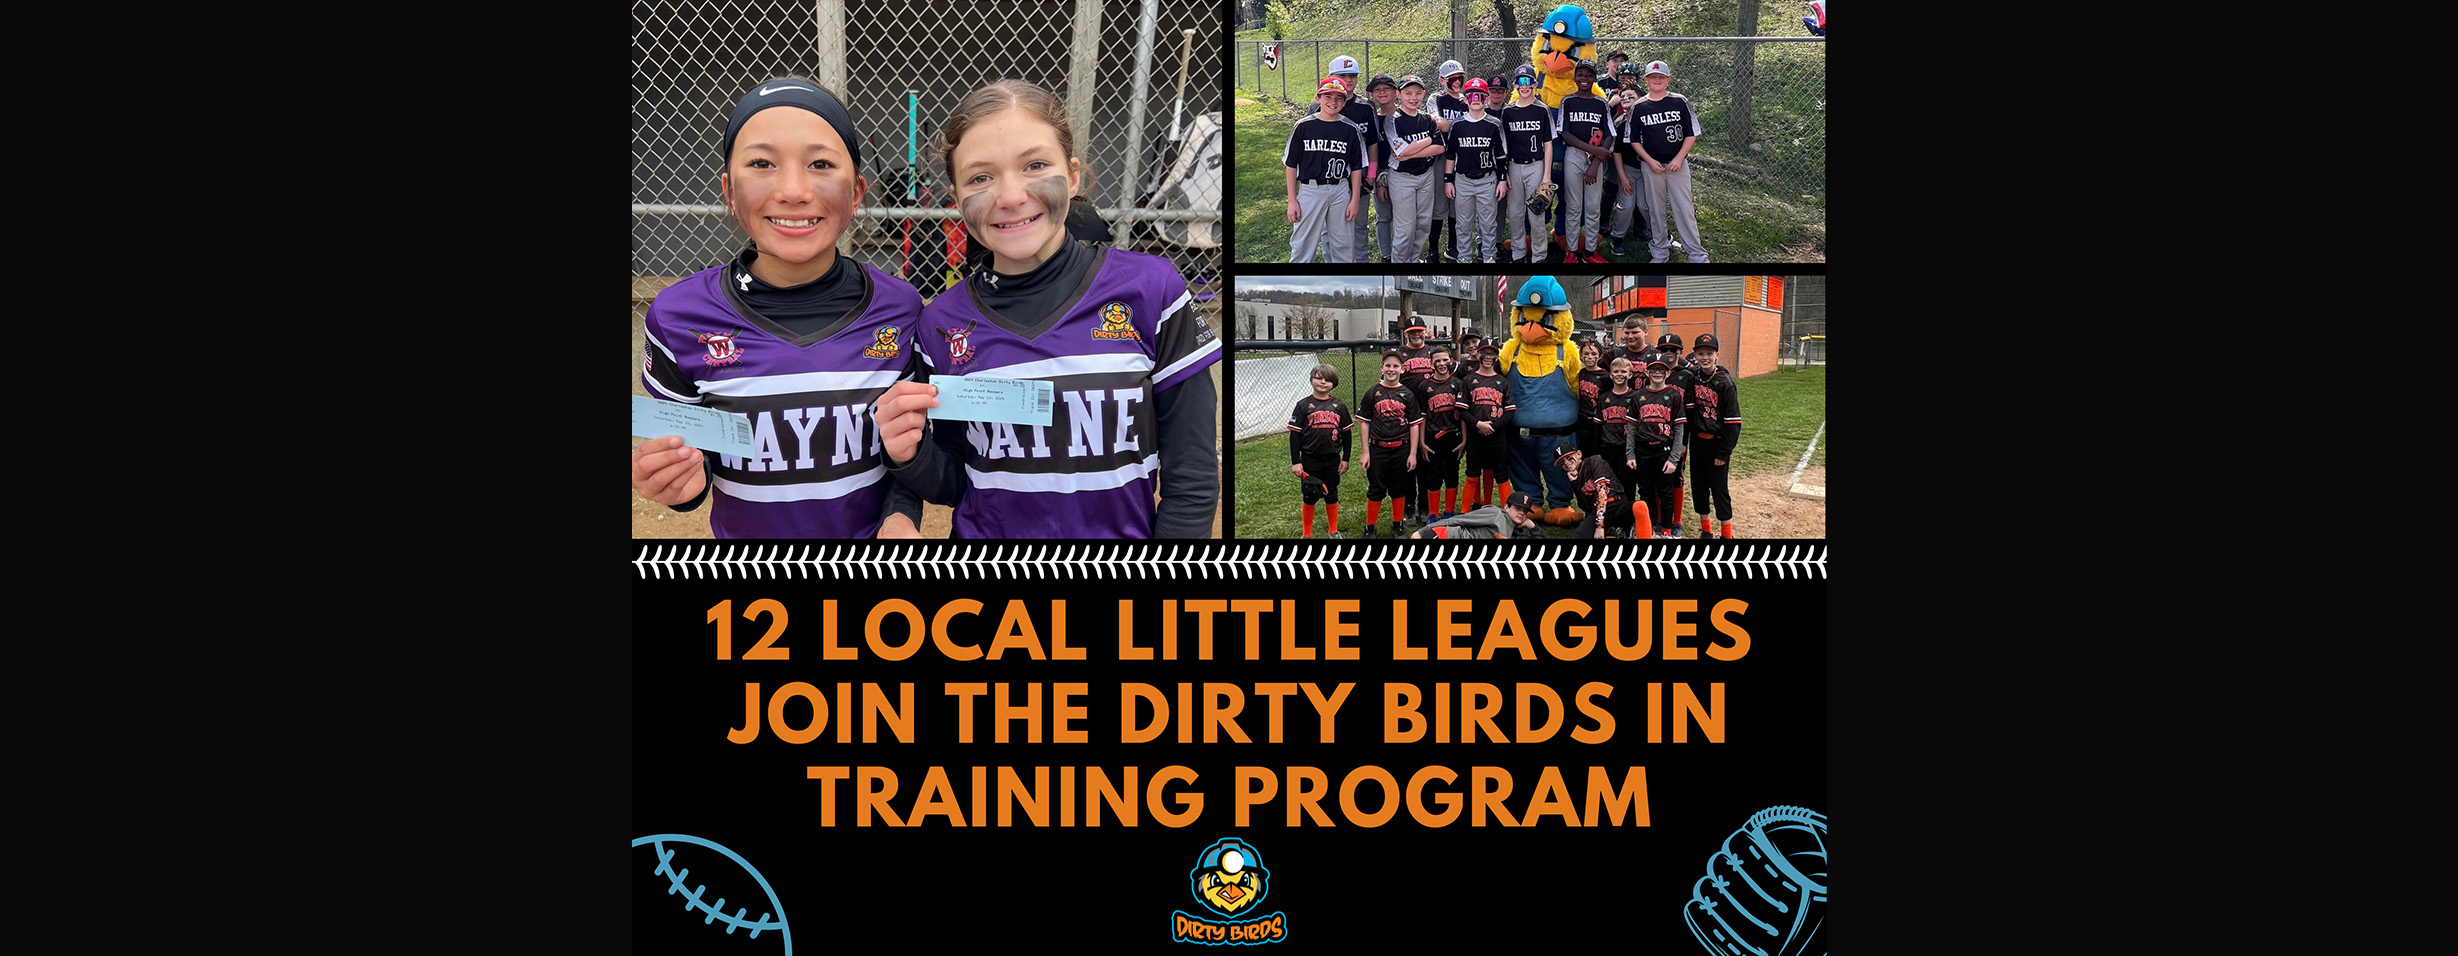 Dirty Birds donate over $75,000 to local youth baseball